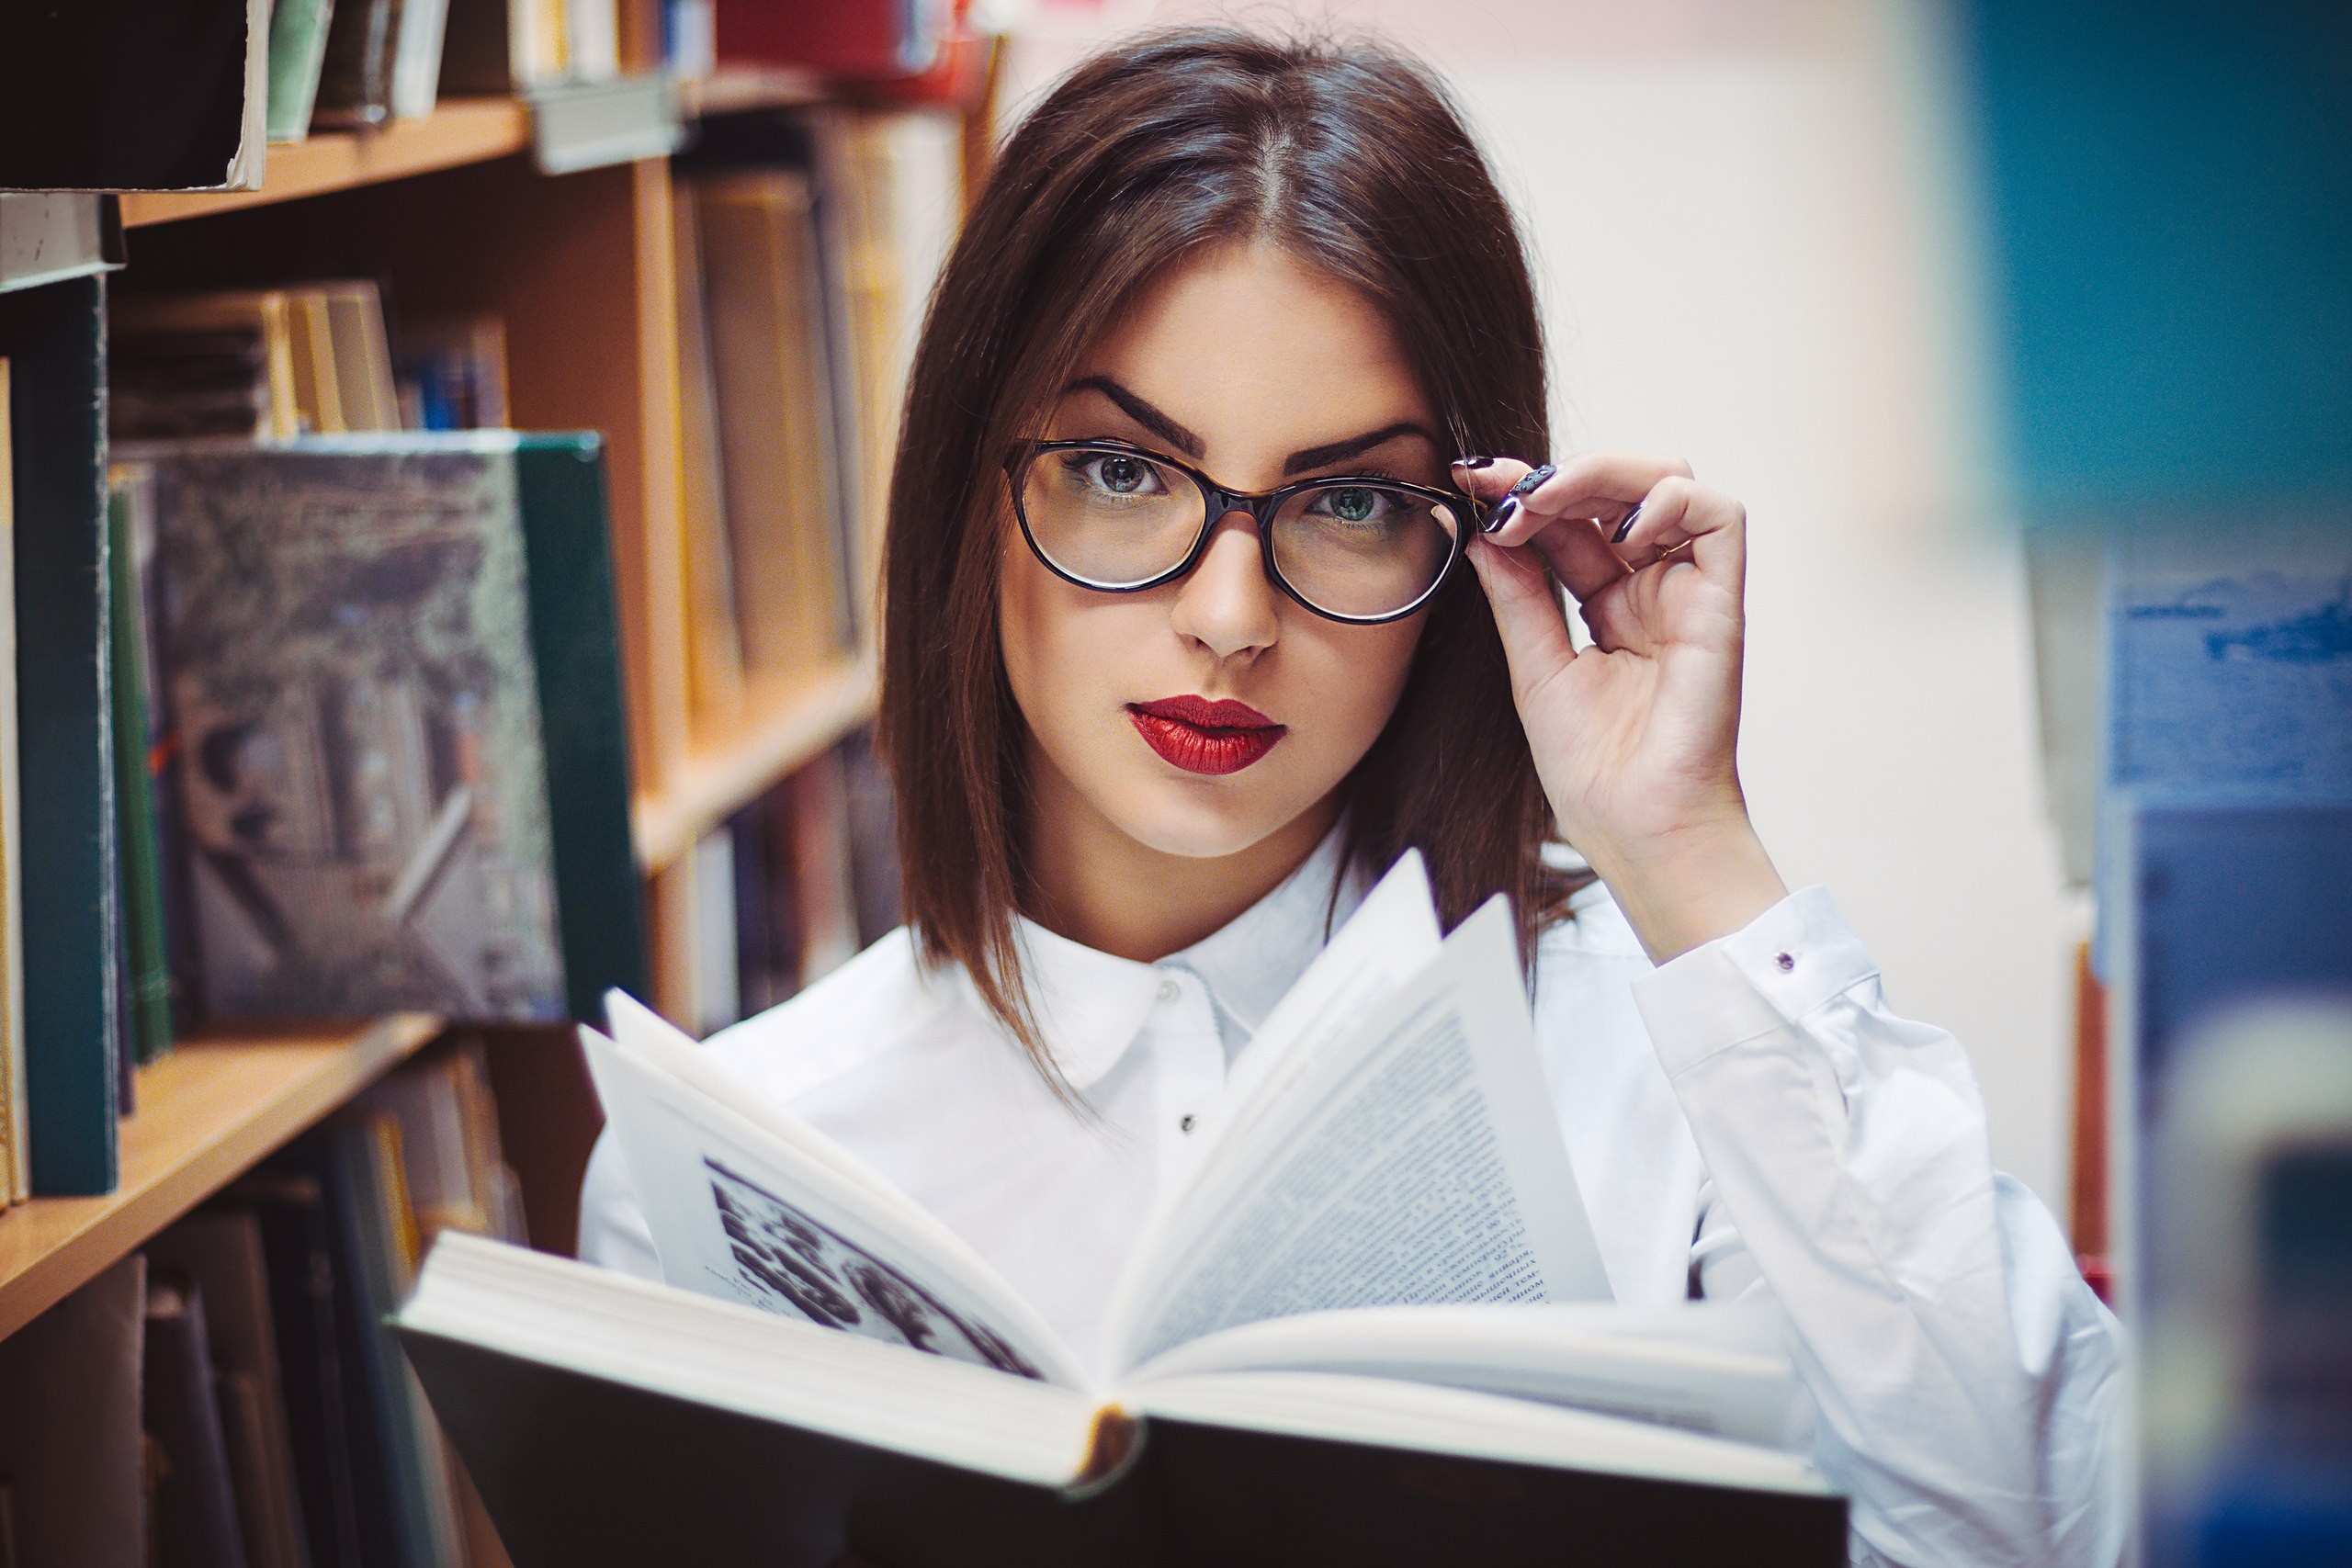 People 2560x1707 women women with glasses glasses books red lipstick portrait brunette women indoors face touching glasses